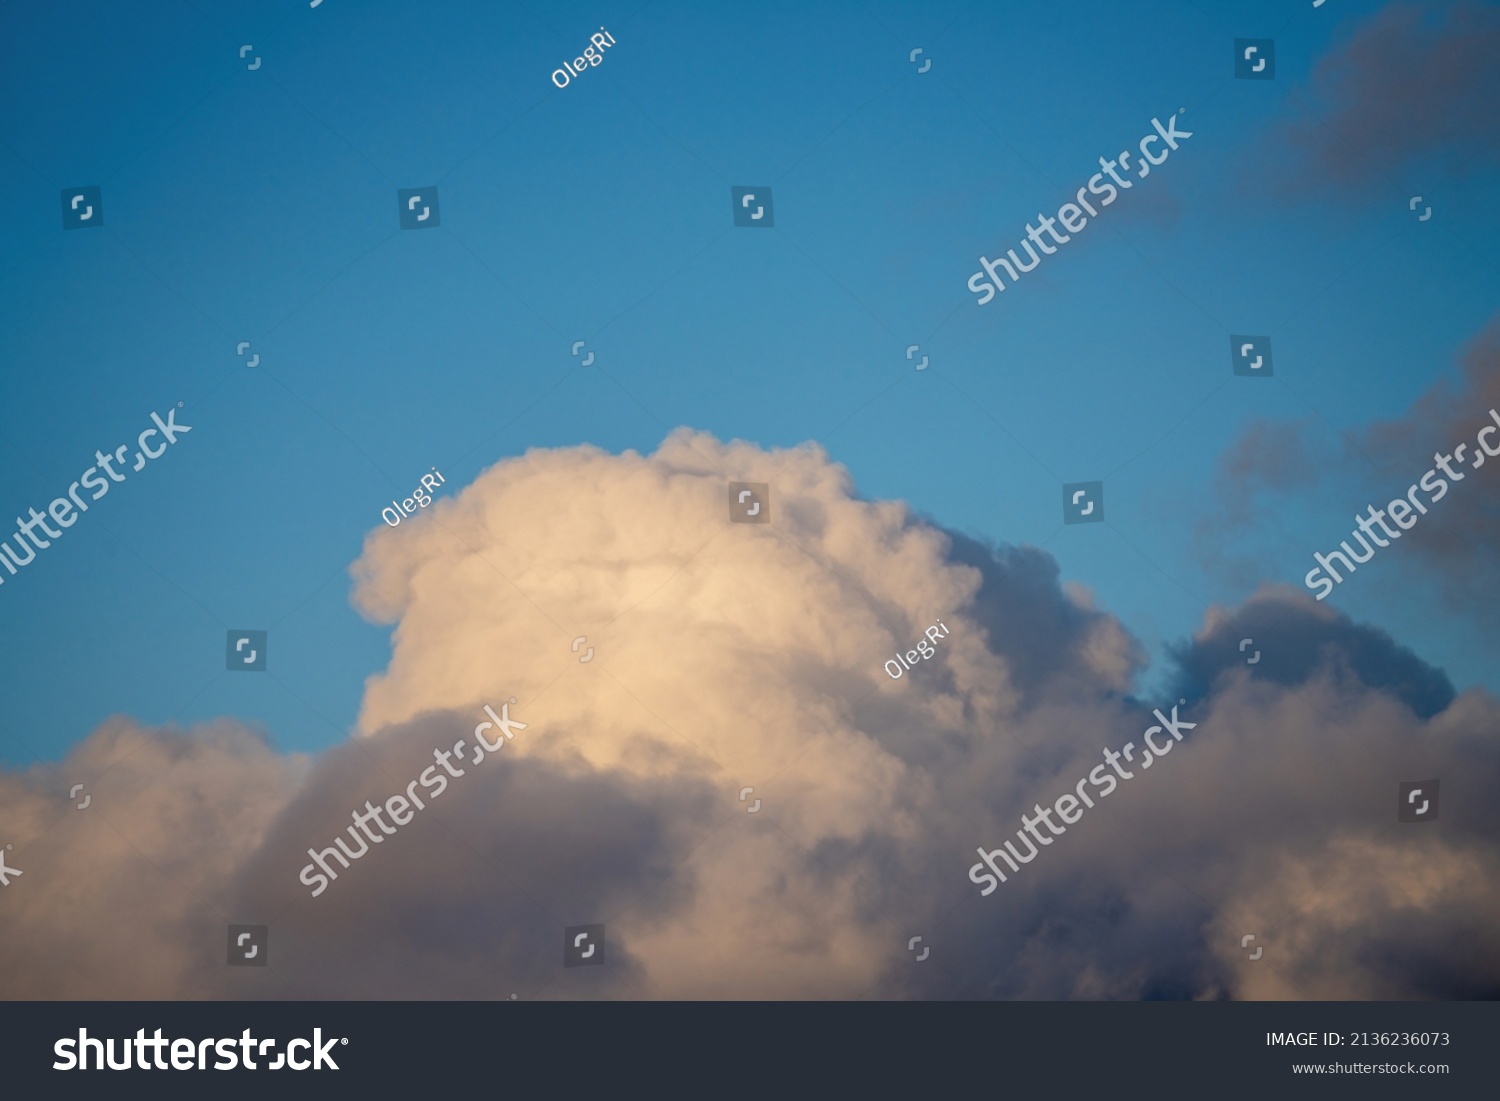 Puffy white cloud on clear blue sky #2136236073